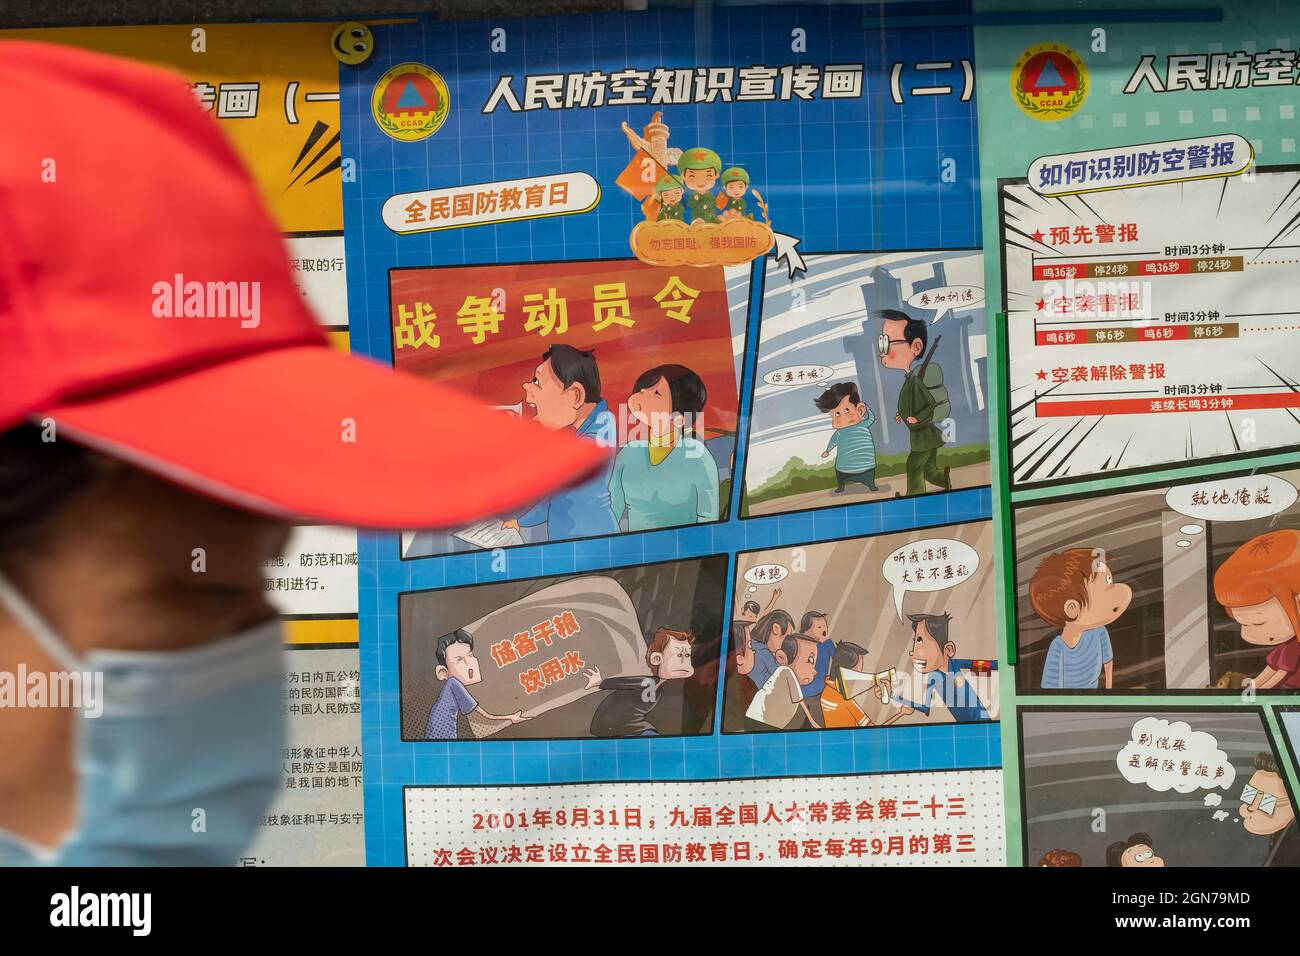 Air defense propaganda of war prep with civilian mobilization in Beijing, China. Yellow Chinese characters: War Mobilization Order. 23-Sep-2021 Stock Photo